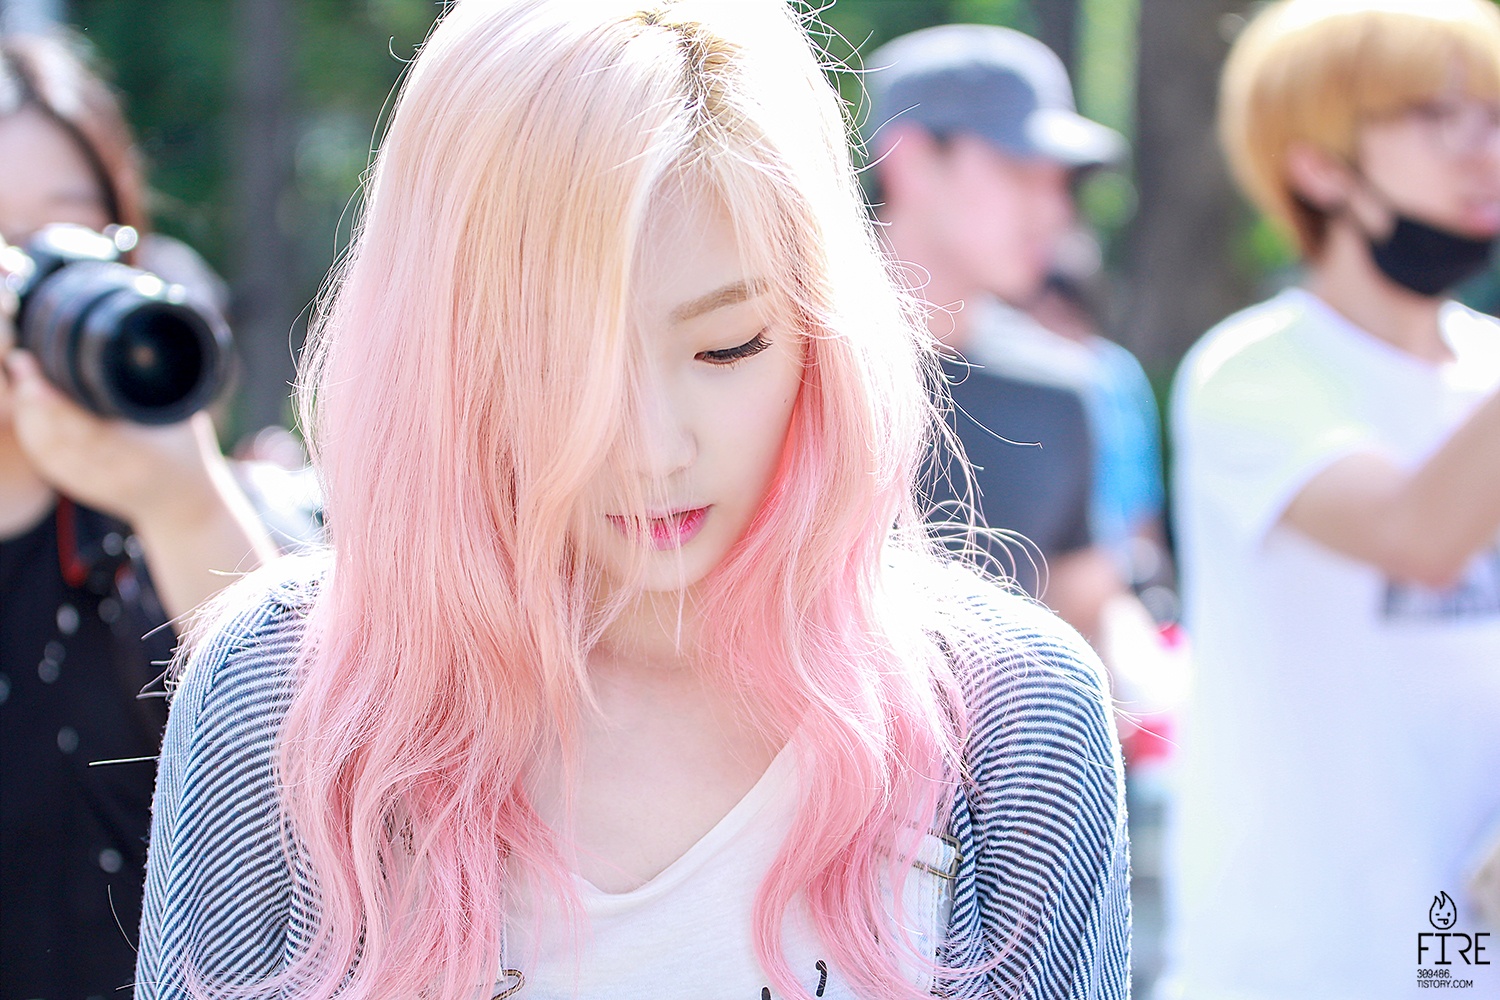 Below are 20 pretty examples of idols' pink hair! 